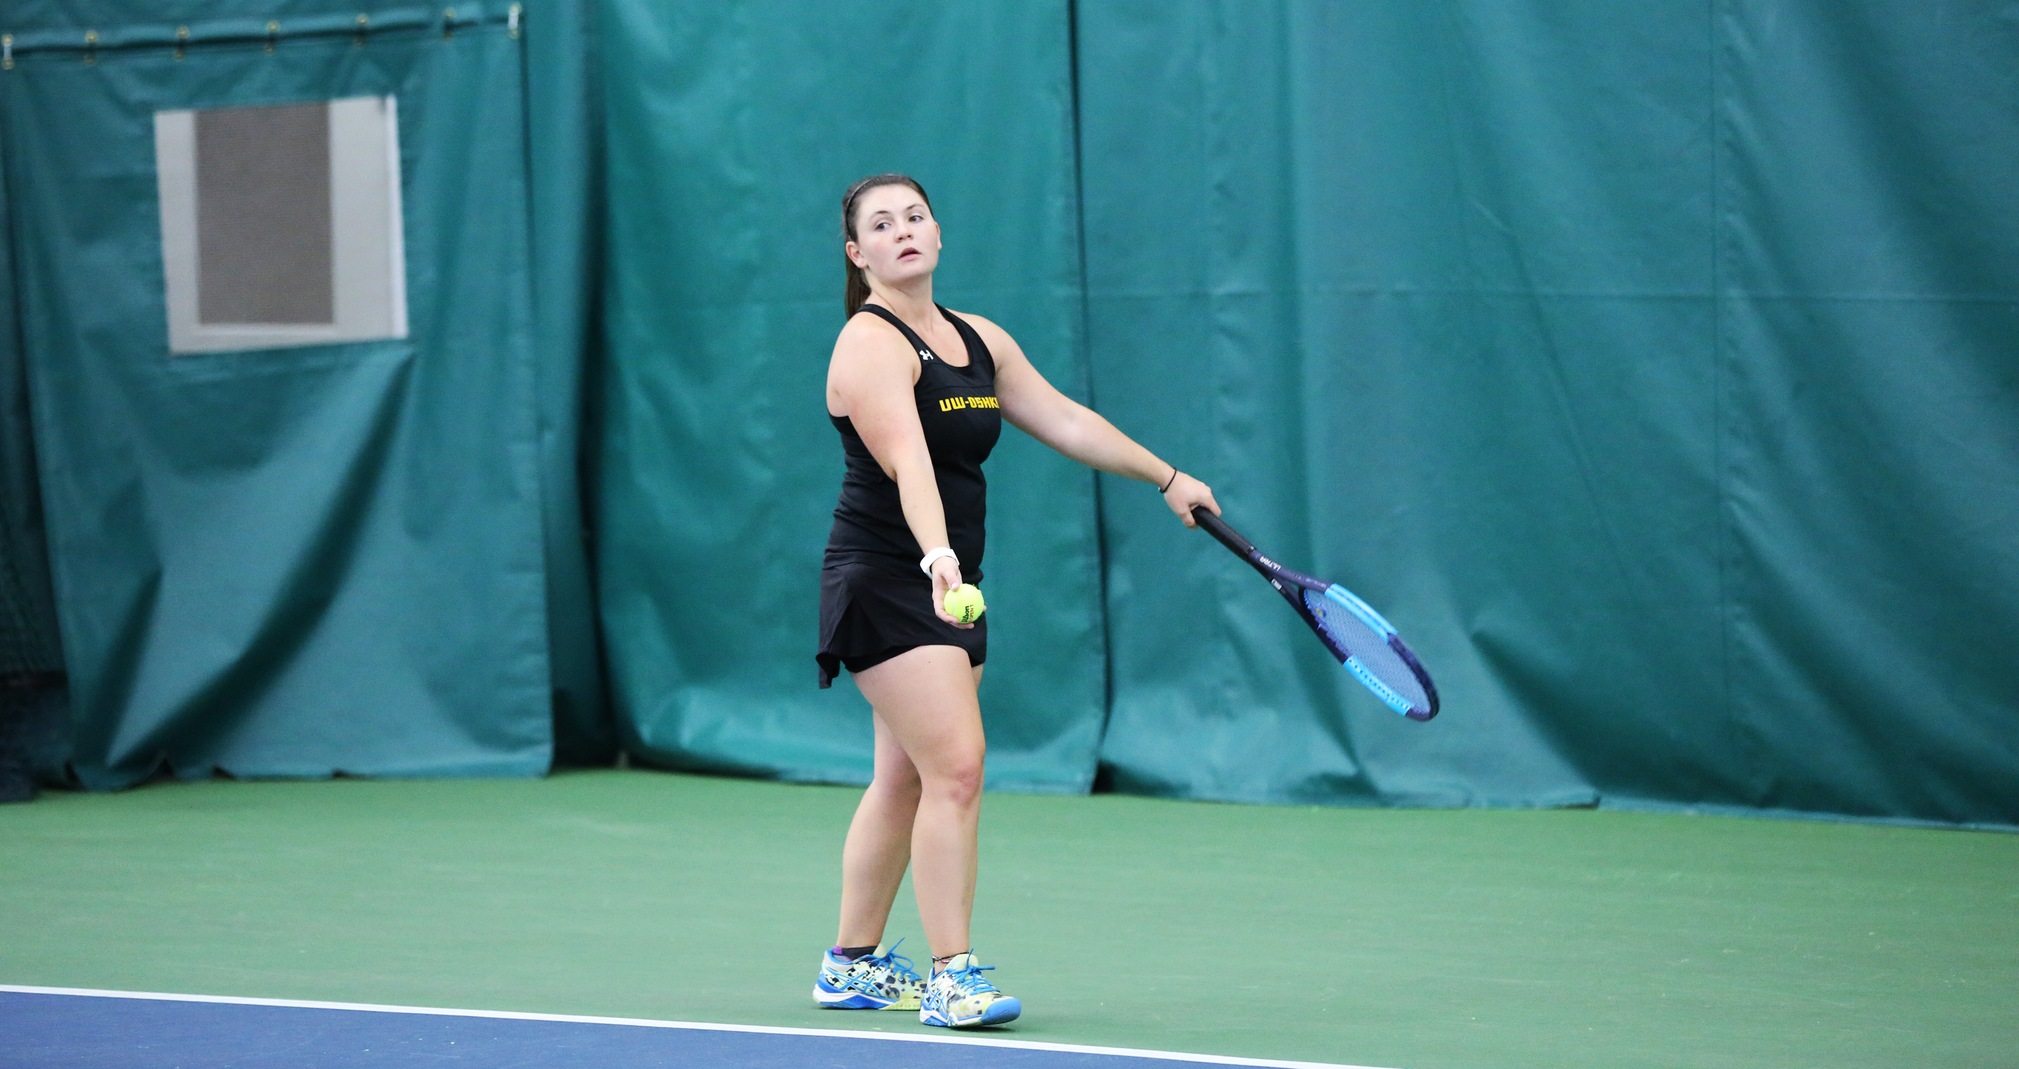 Samantha Koppa won the decisive contest against the Kohawks with her victory at No. 2 singles.